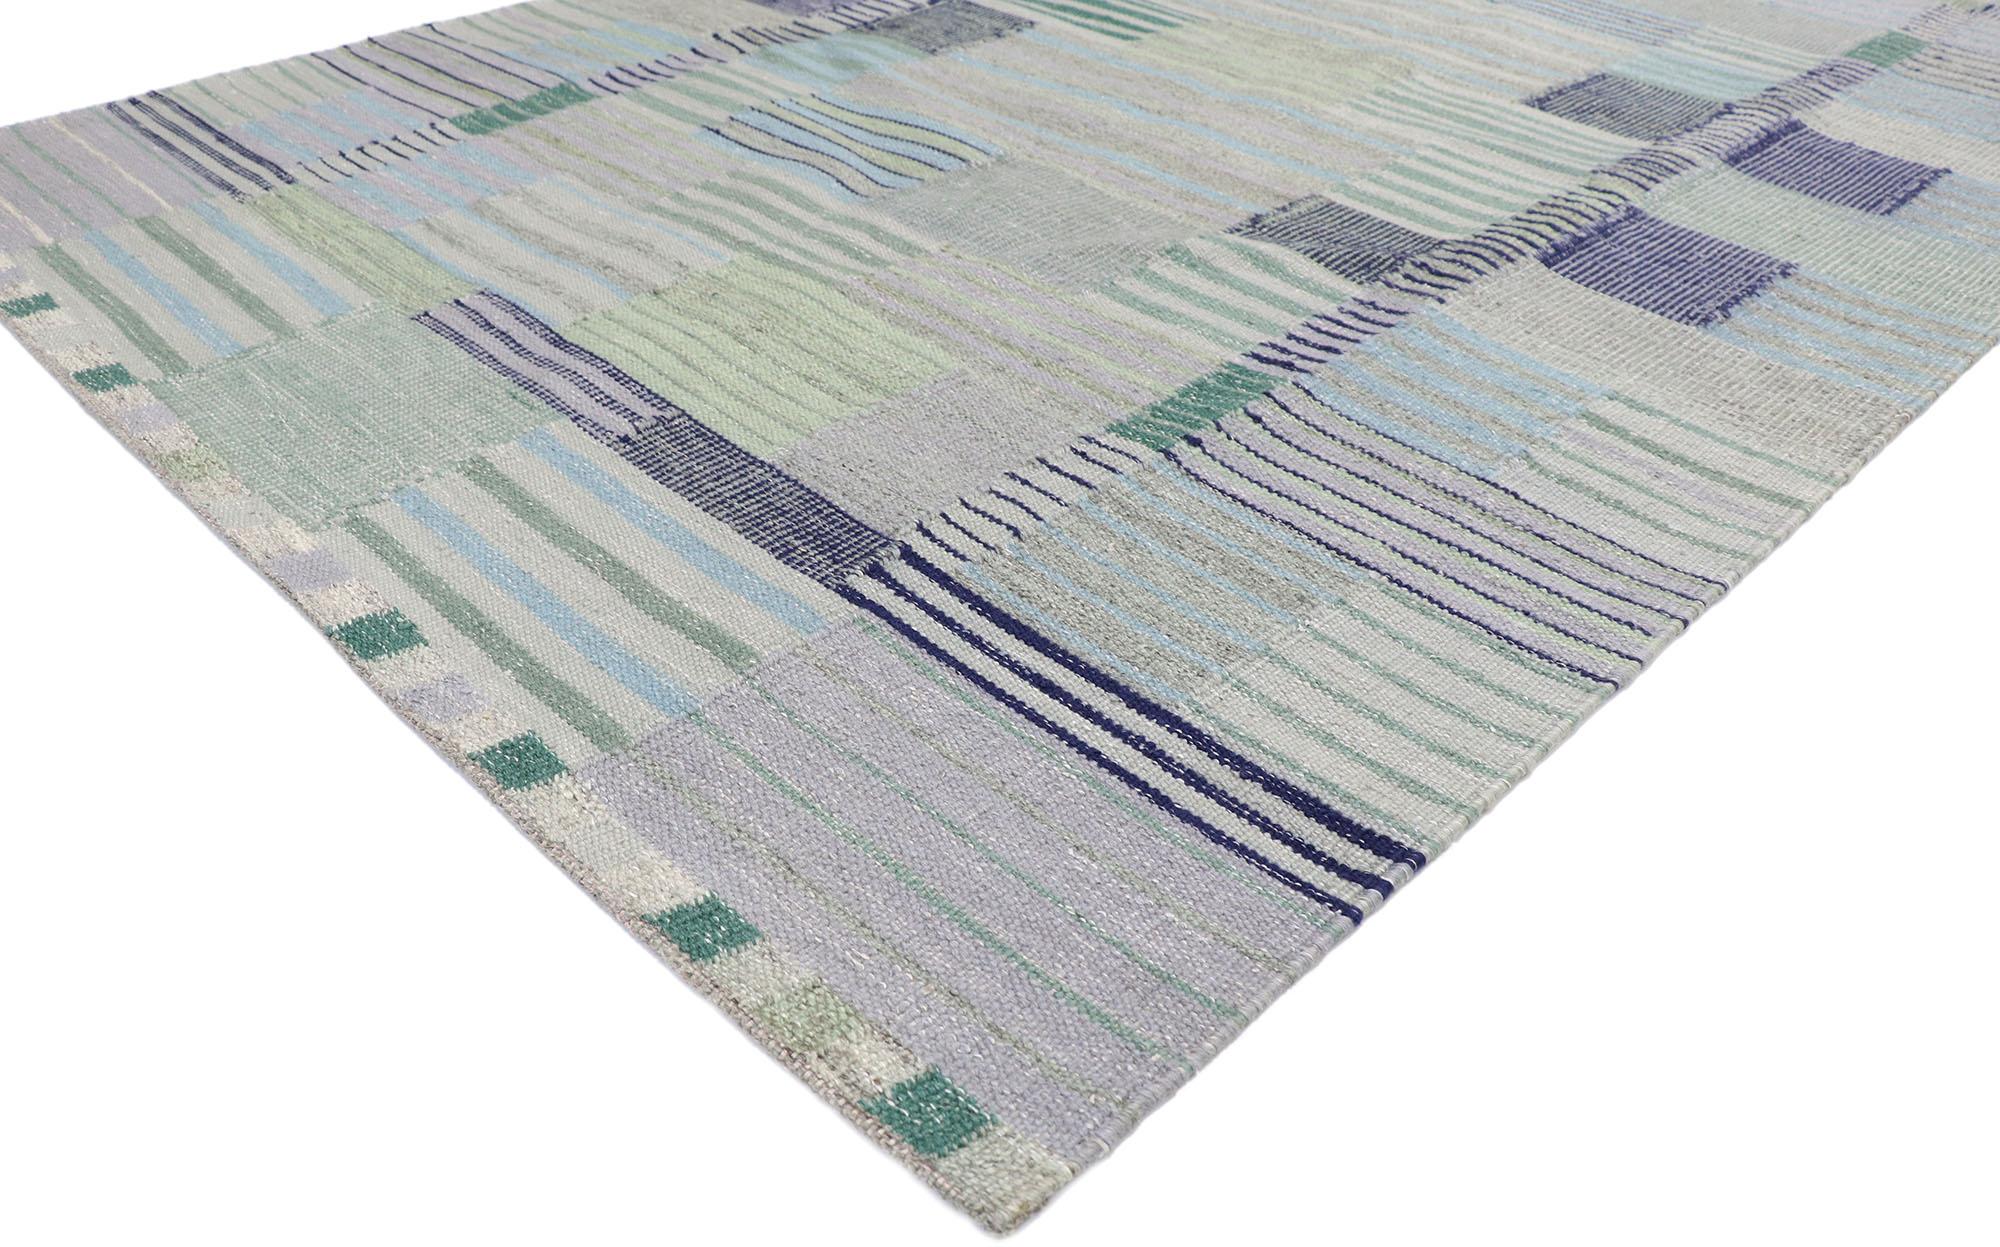 30642 New Contemporary Swedish Inspired Kilim rug with Bohemian Scandinavian Modern style. With its geometric design and bohemian hygge vibes, this hand-woven wool Swedish Indian Kilim rug beautifully embodies the simplicity of Scandinavian modern